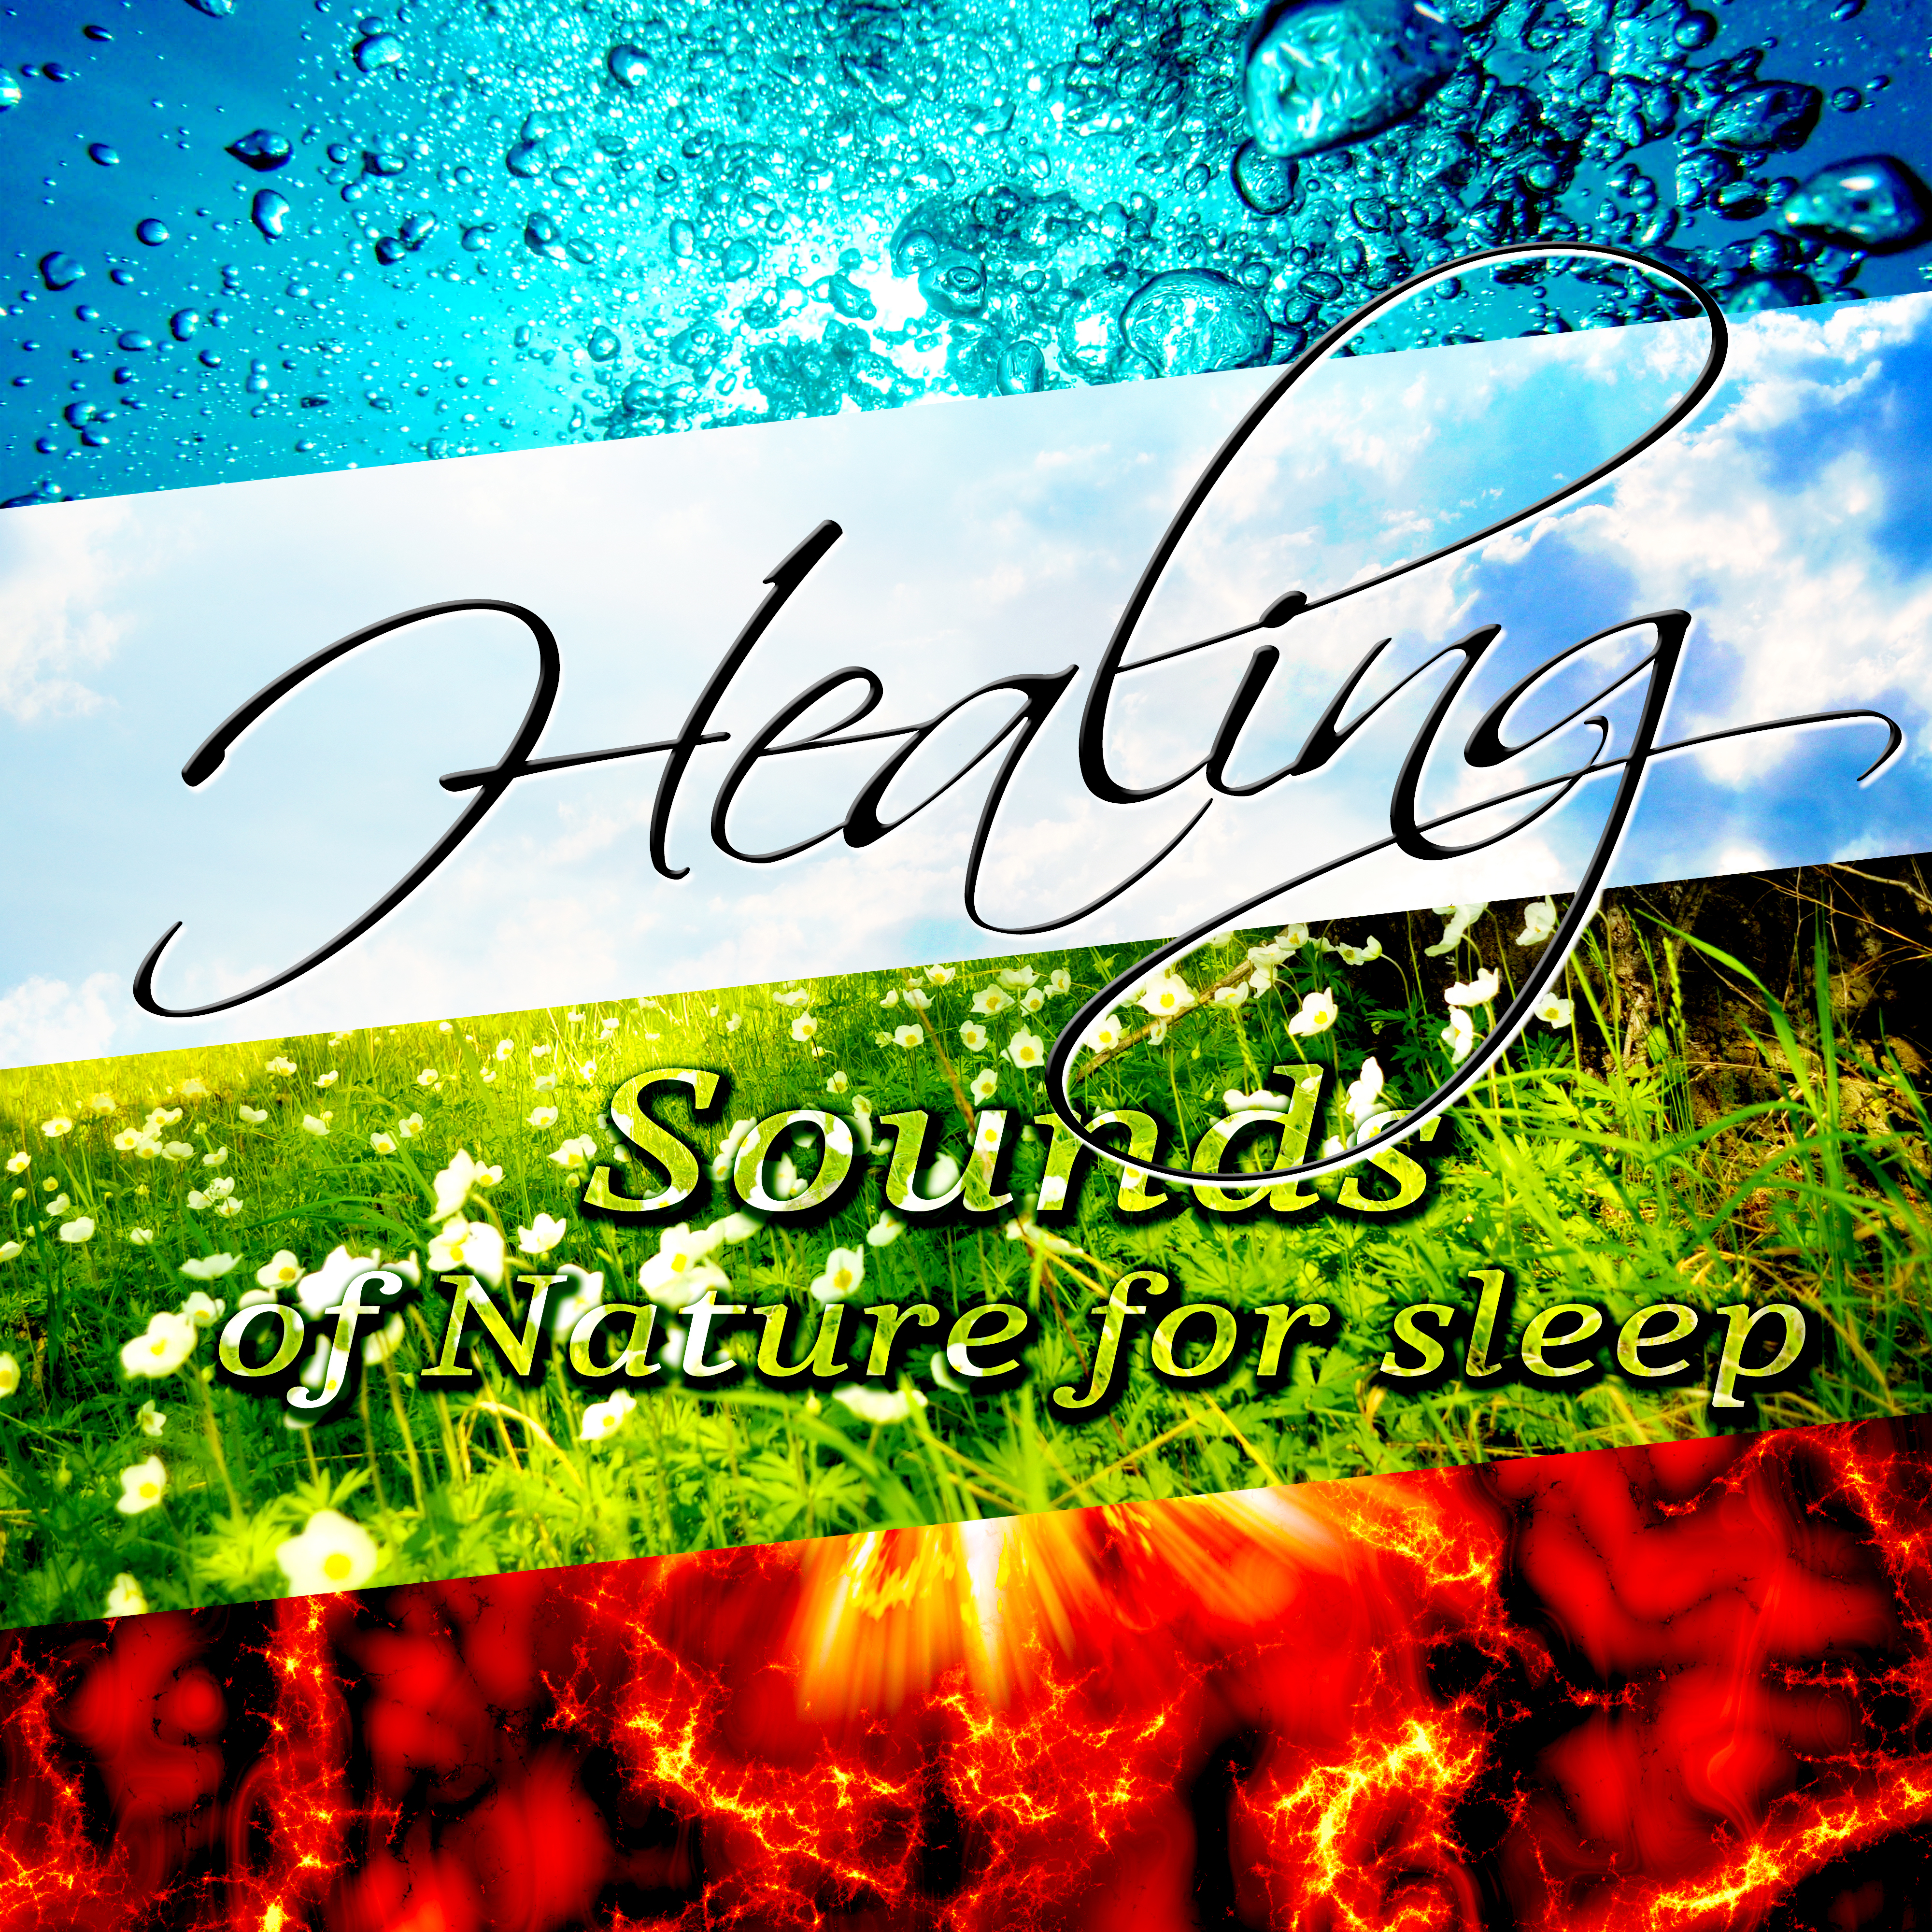 Healing Sounds of Nature for Sleep  Ocean Waves, Birds Singing, Flute Music, Shakuhachi, Relaxing Piano and Other Natural Sounds